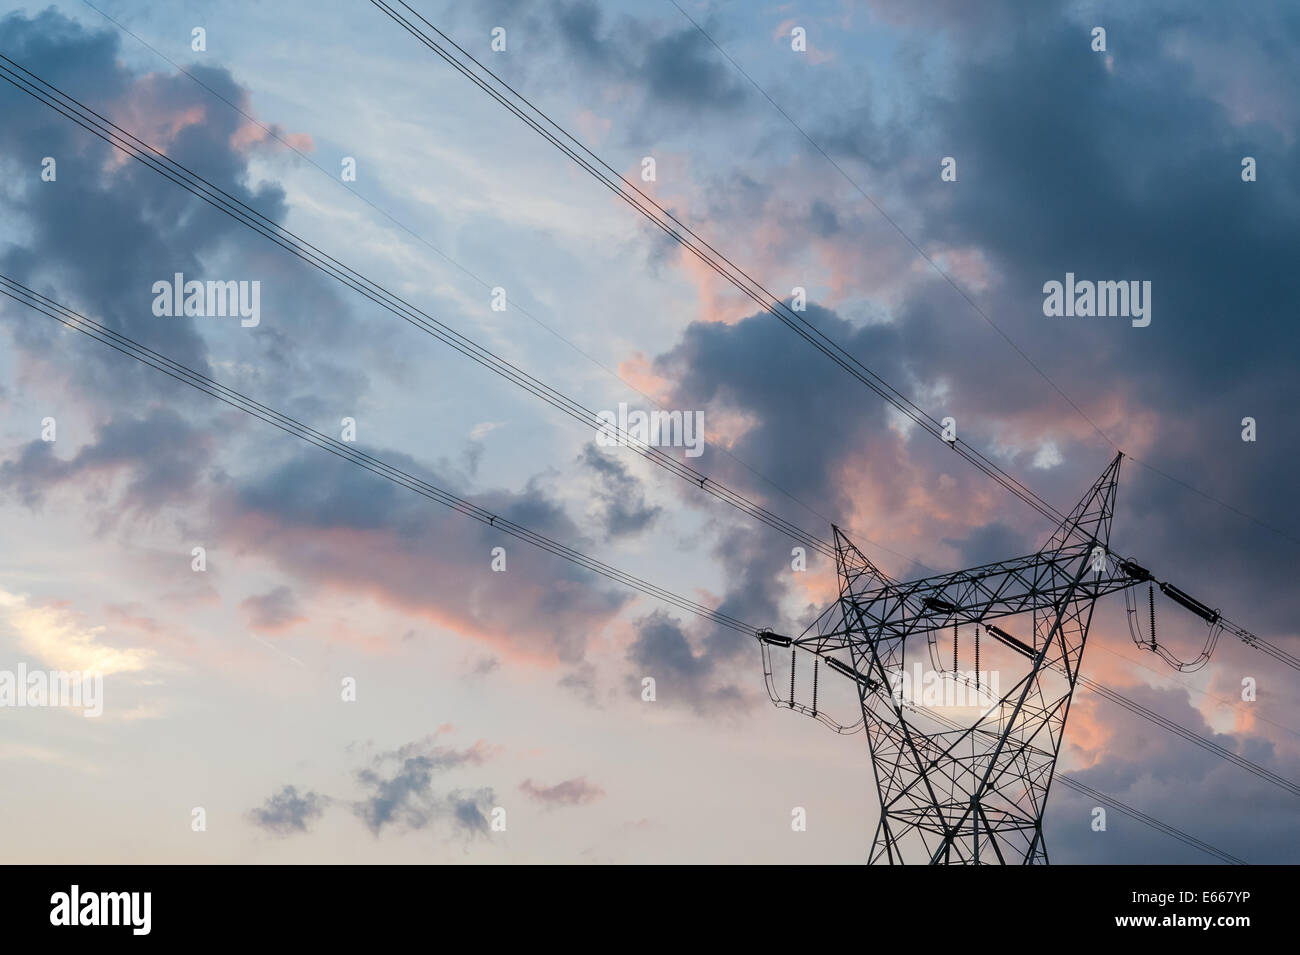 Silhouette of high-voltage power lines and tower against a stormy, cloudy sky at sunset. Stock Photo